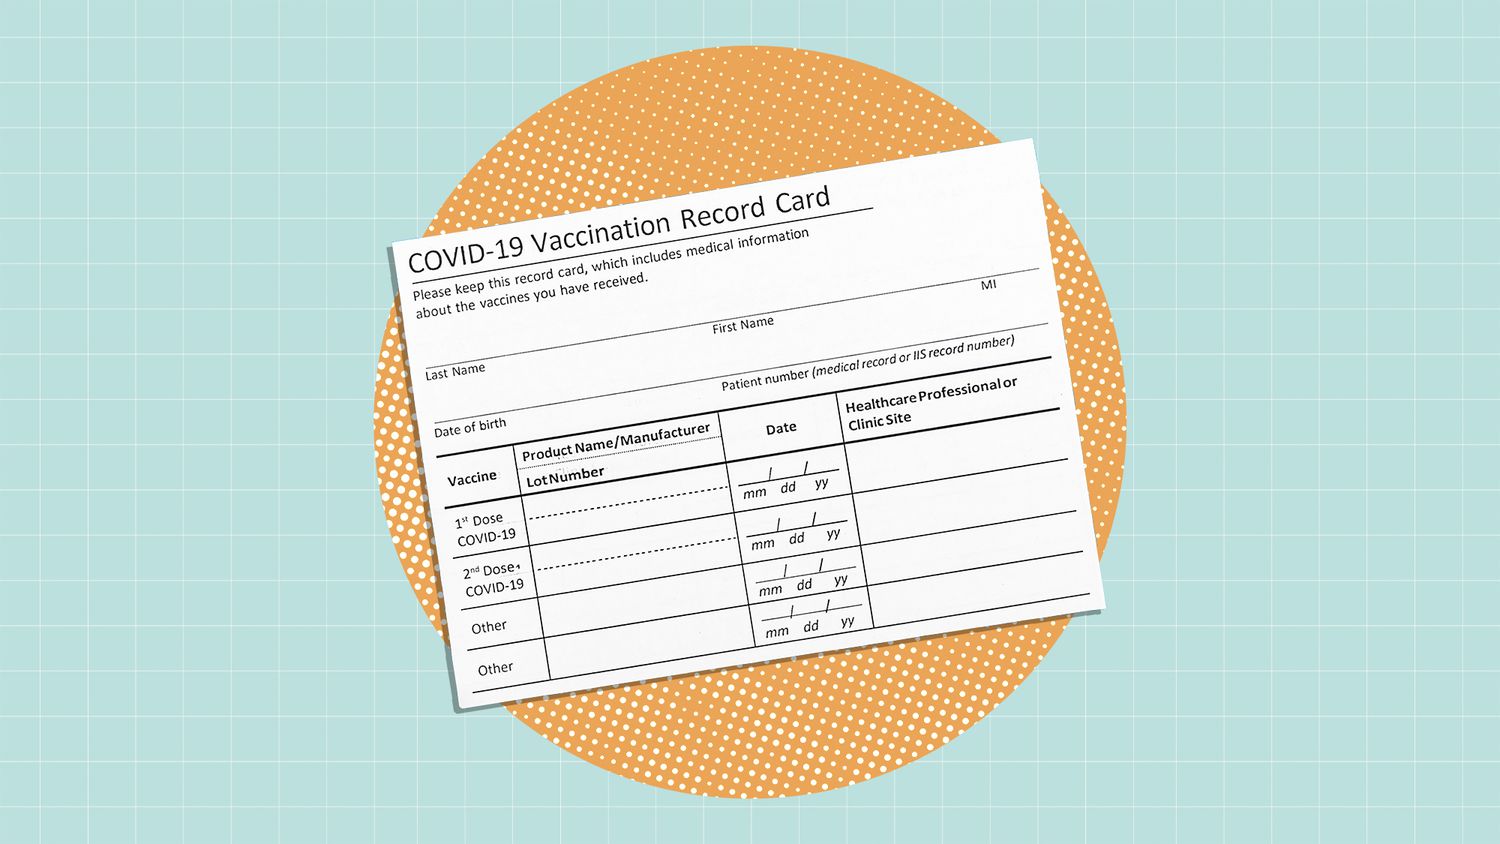 COVID-19 Vaccine Record card on a designed background